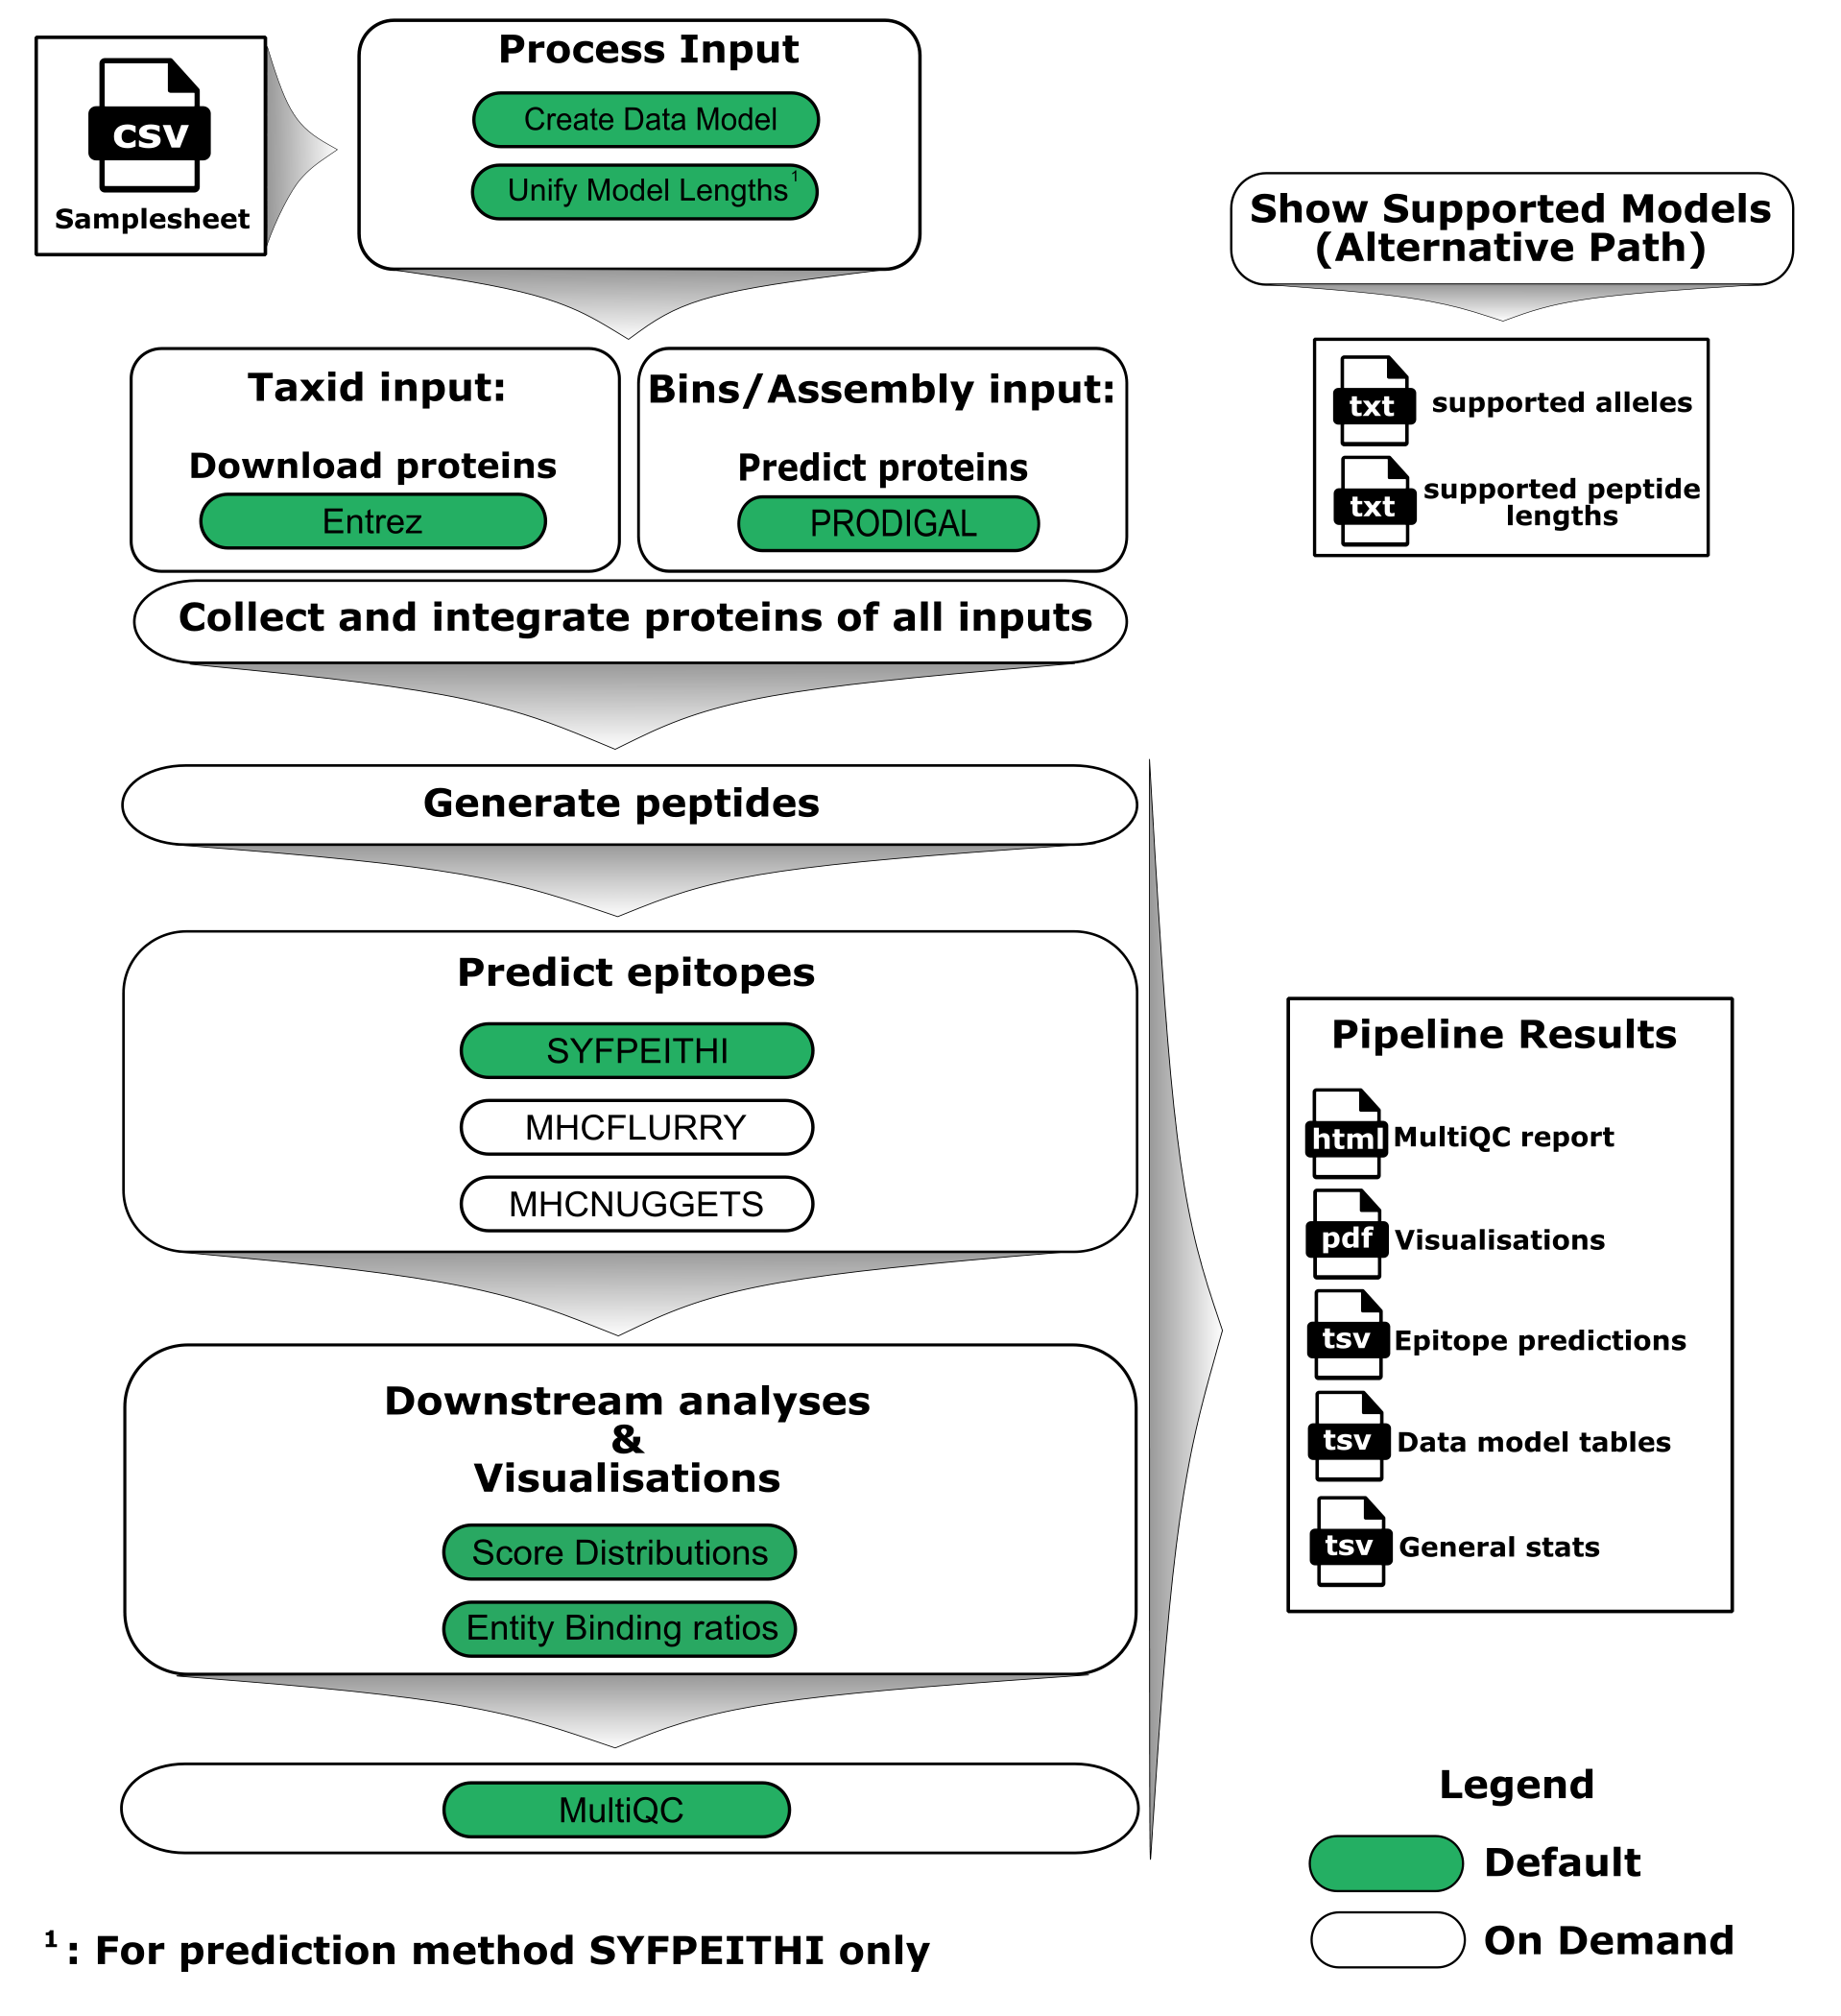 nf-core/metapep workflow overview